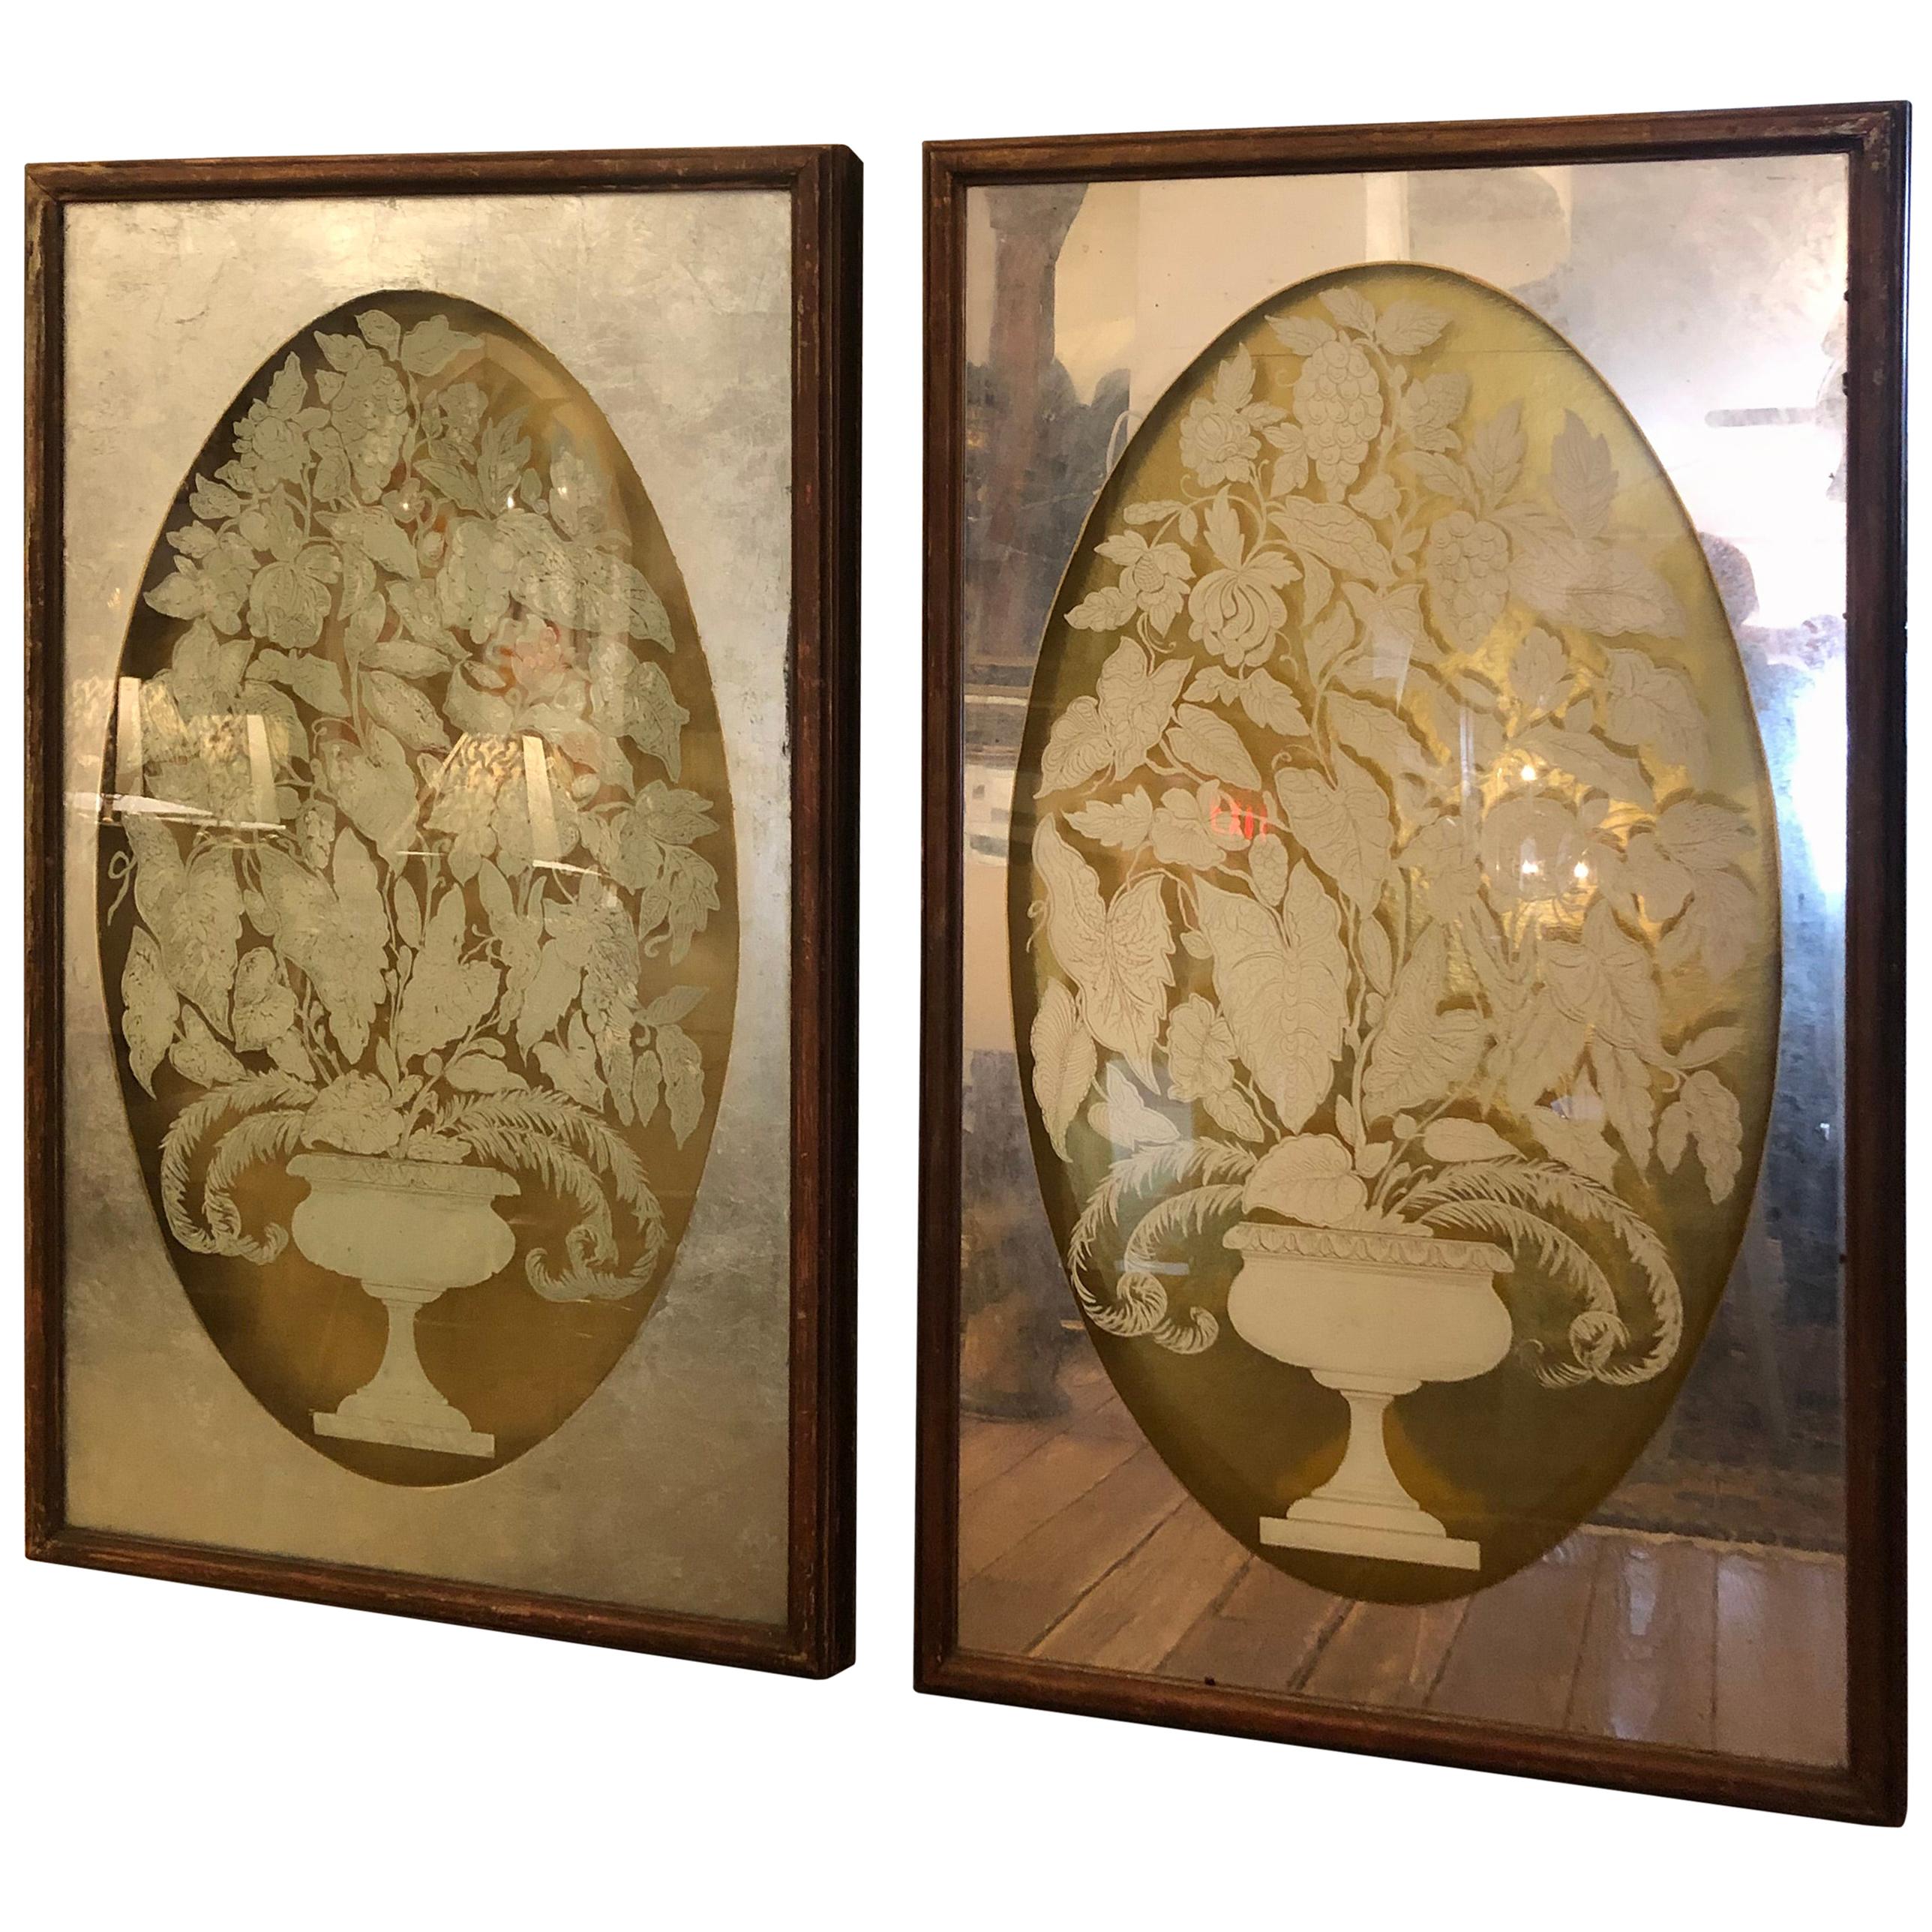 Spectacular Large Églomisé Reverse Painting on Glass Silver and Gold Leaf Panels